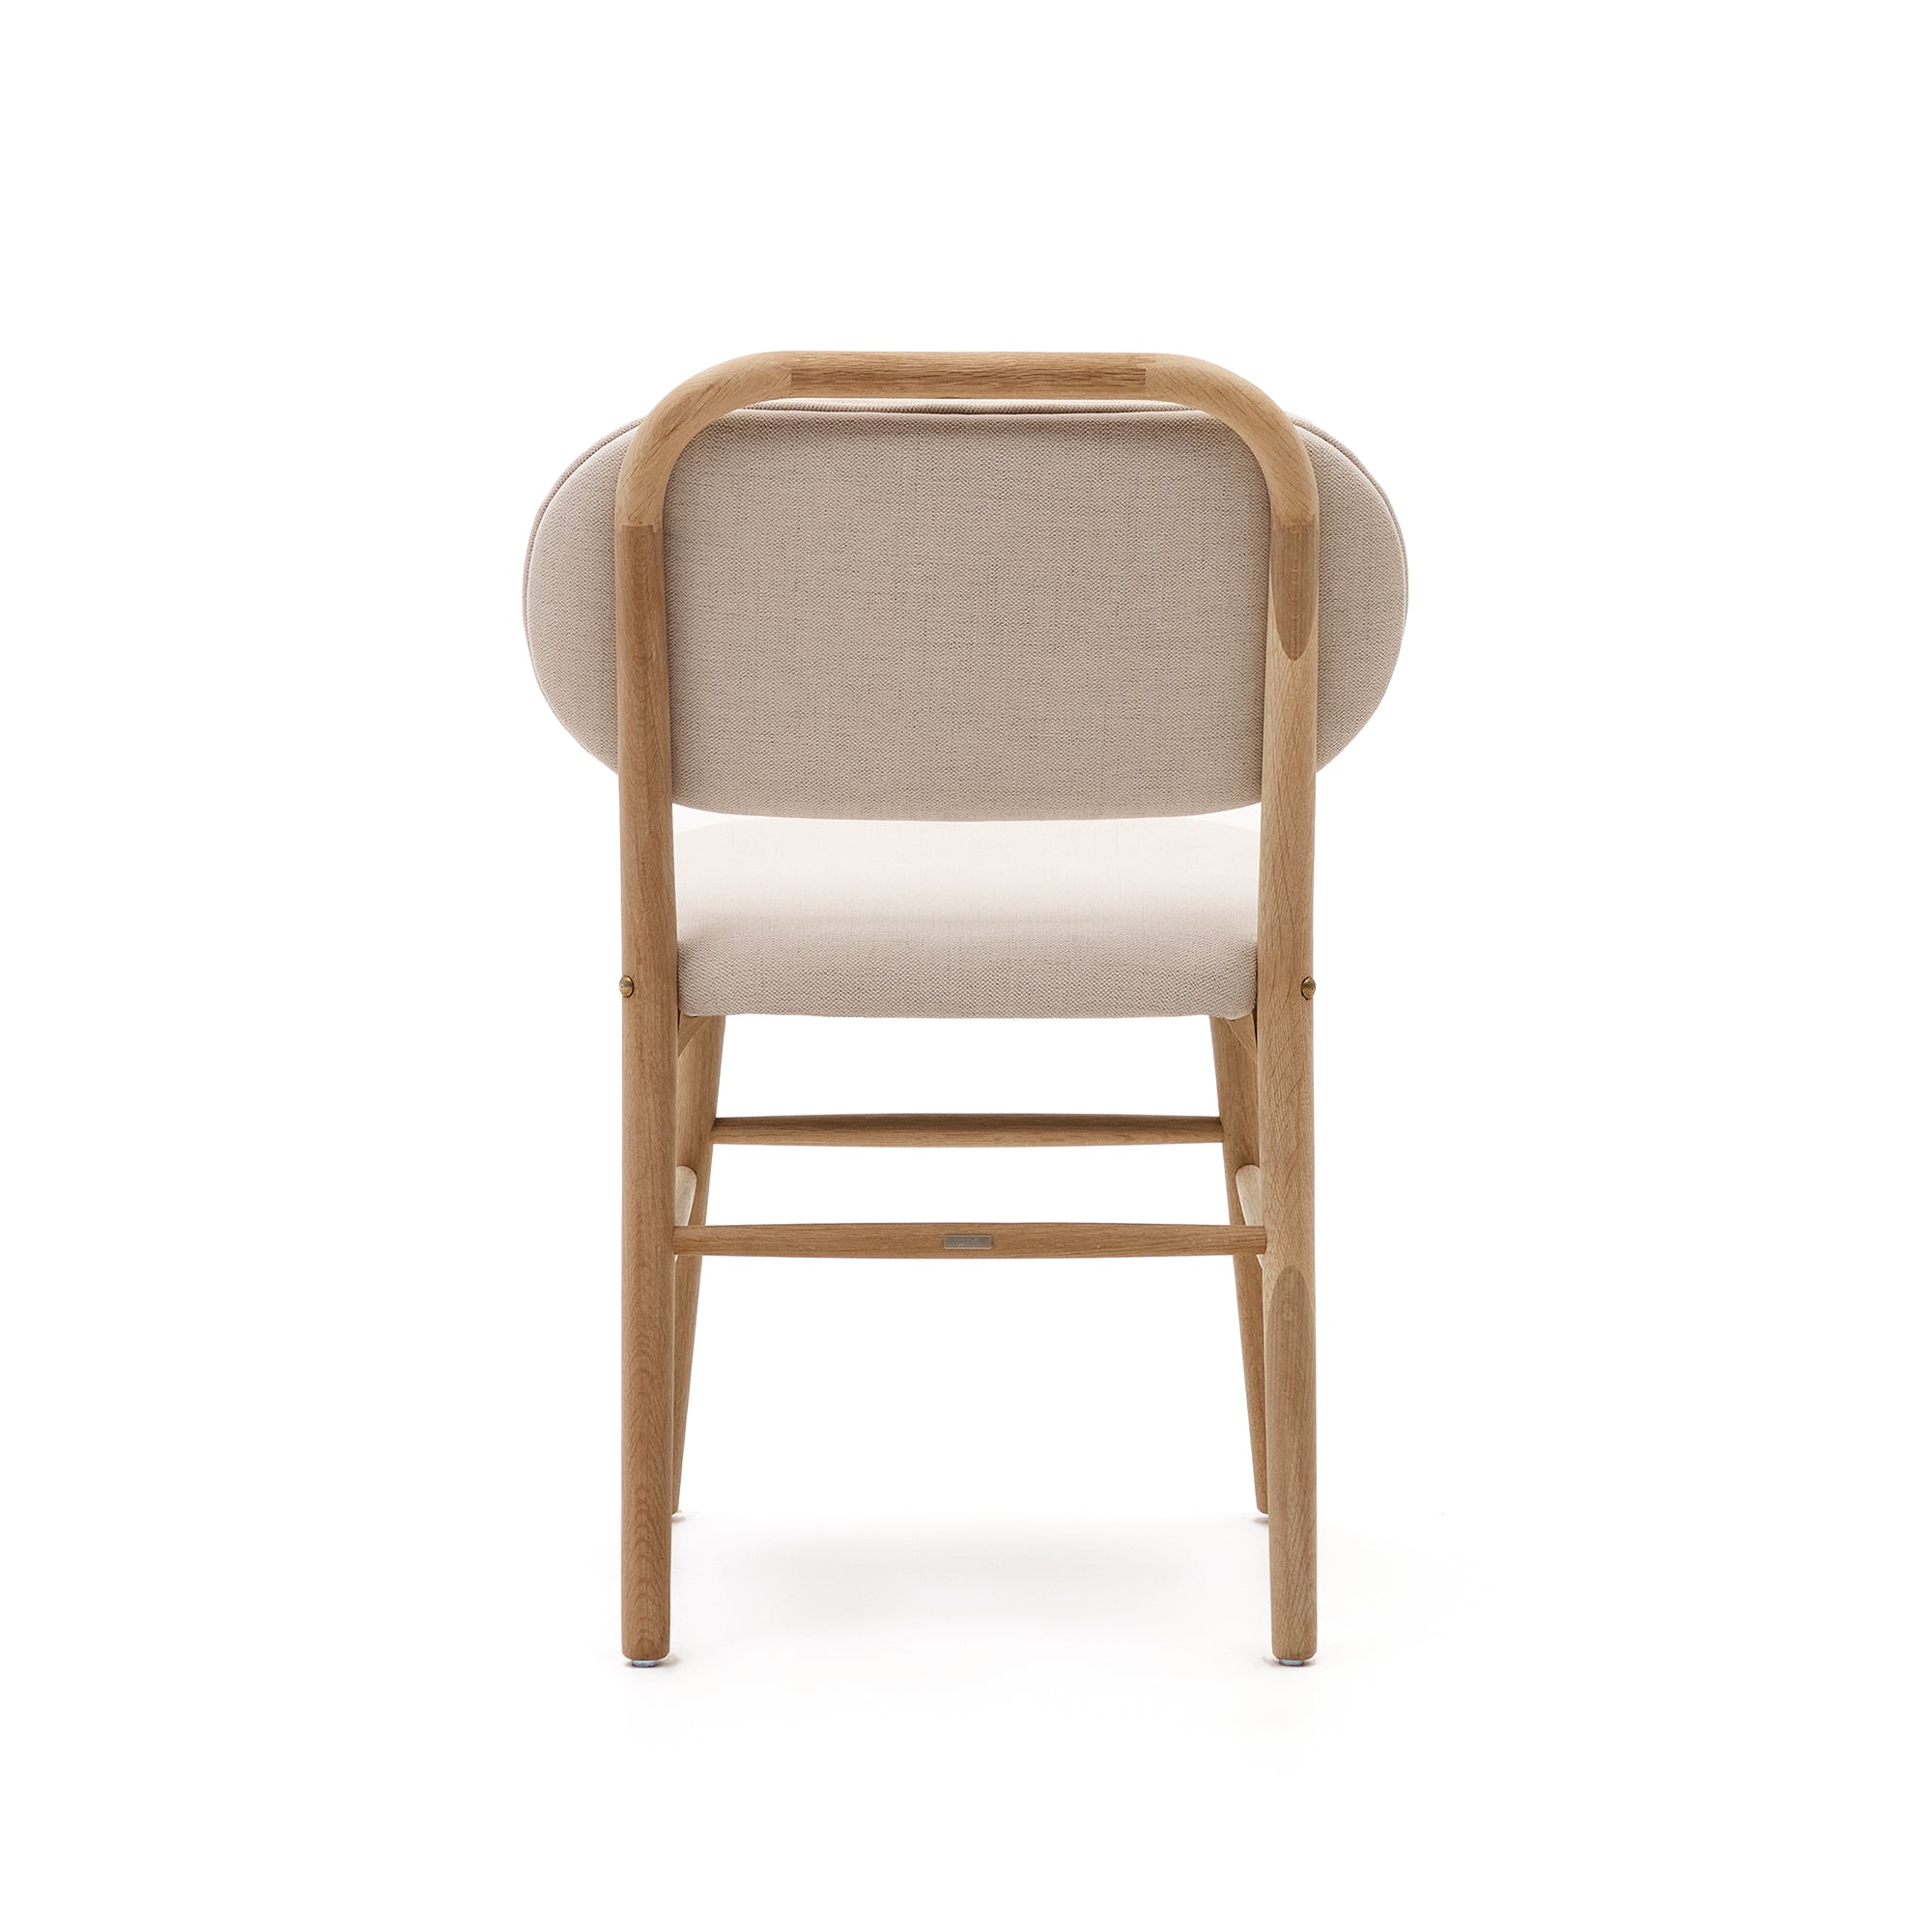 Helda chair in beige chenille and solid oak wood